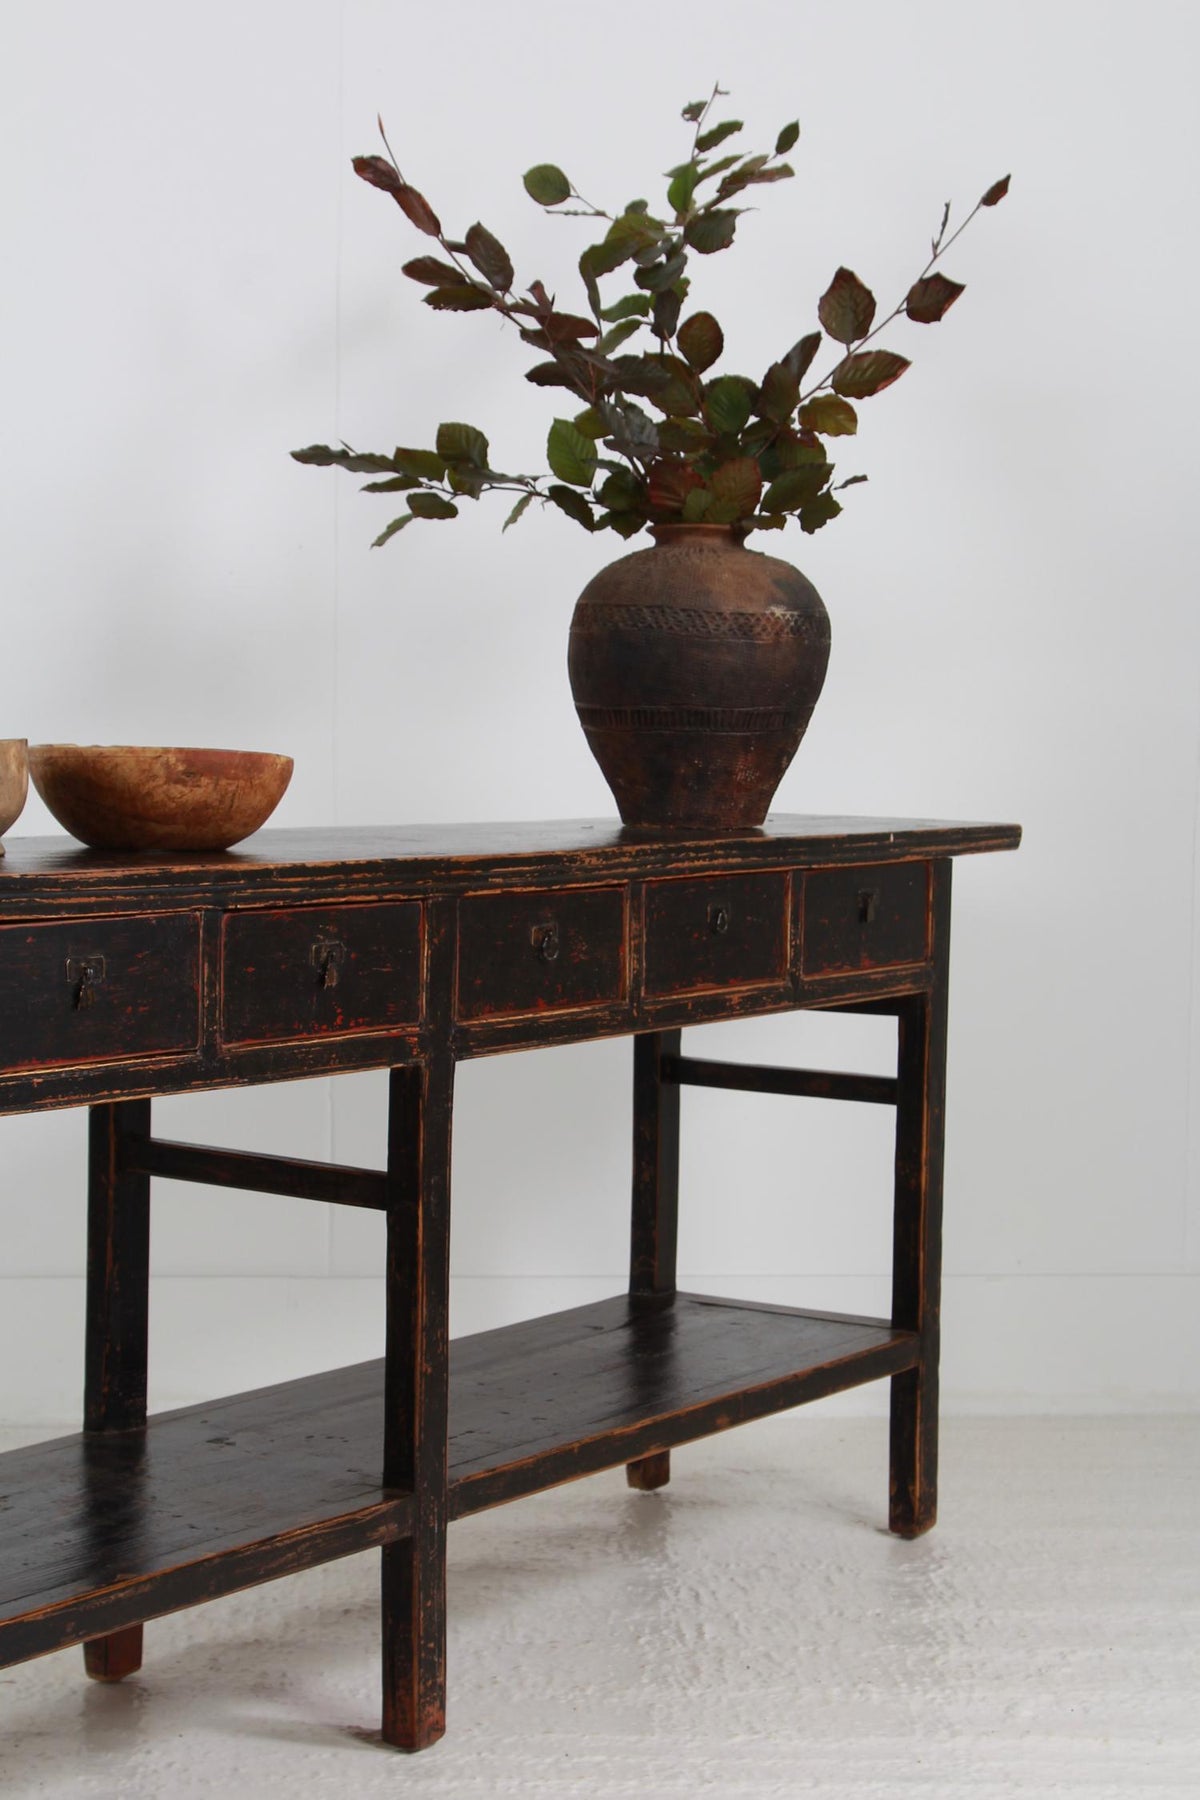 Stylish XL Antique Six Drawer Console Table in Striking Black Paint